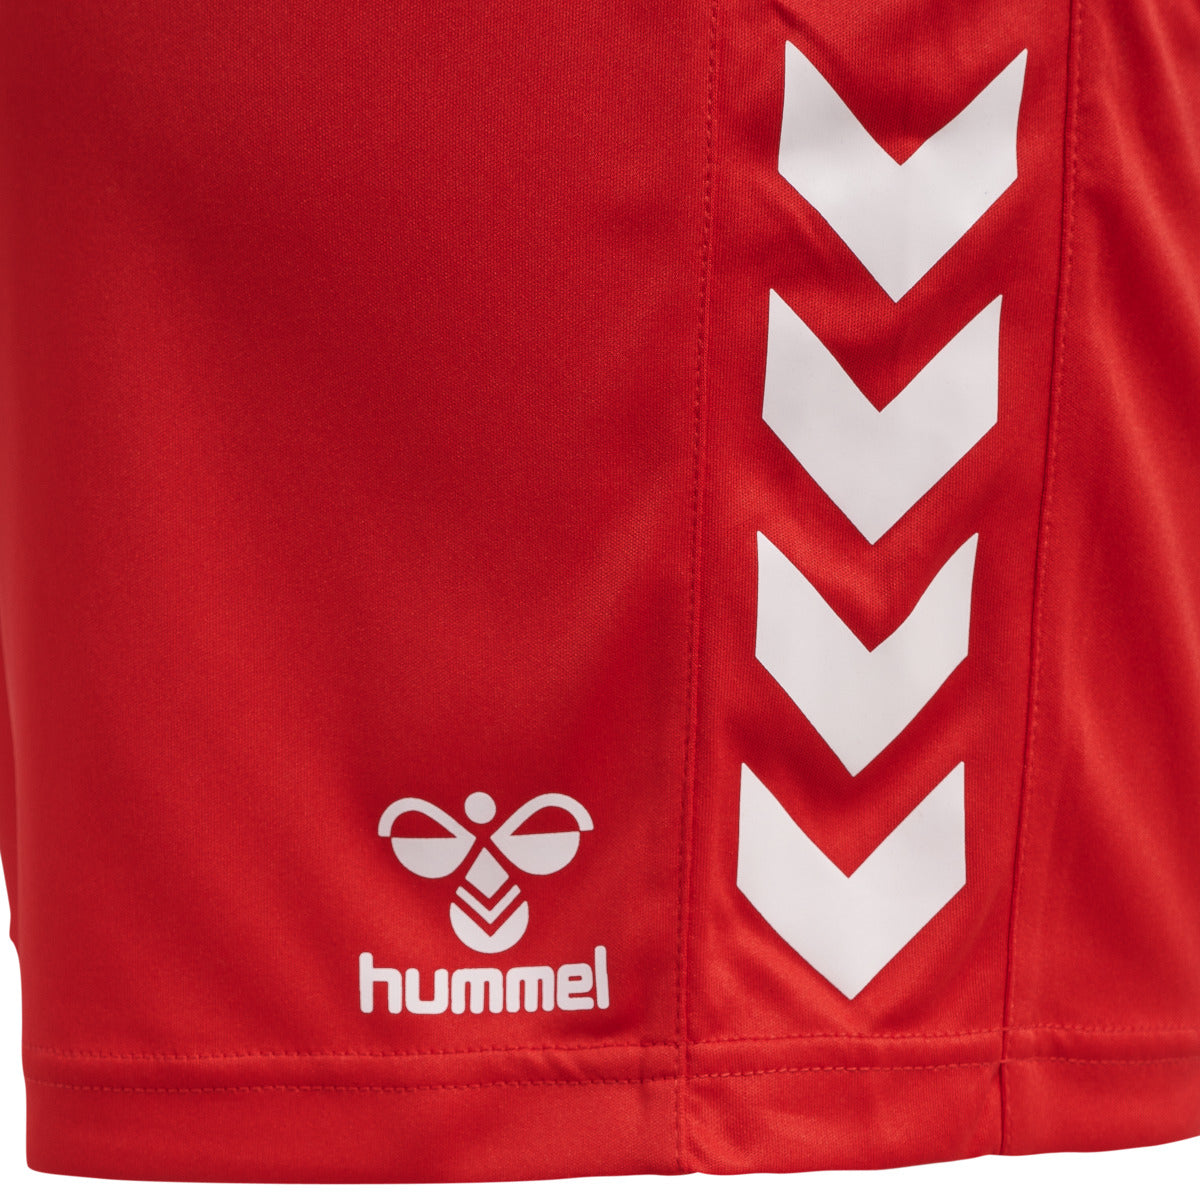 hmlCORE XK POLY SHORTS WOMAN TRUE RED